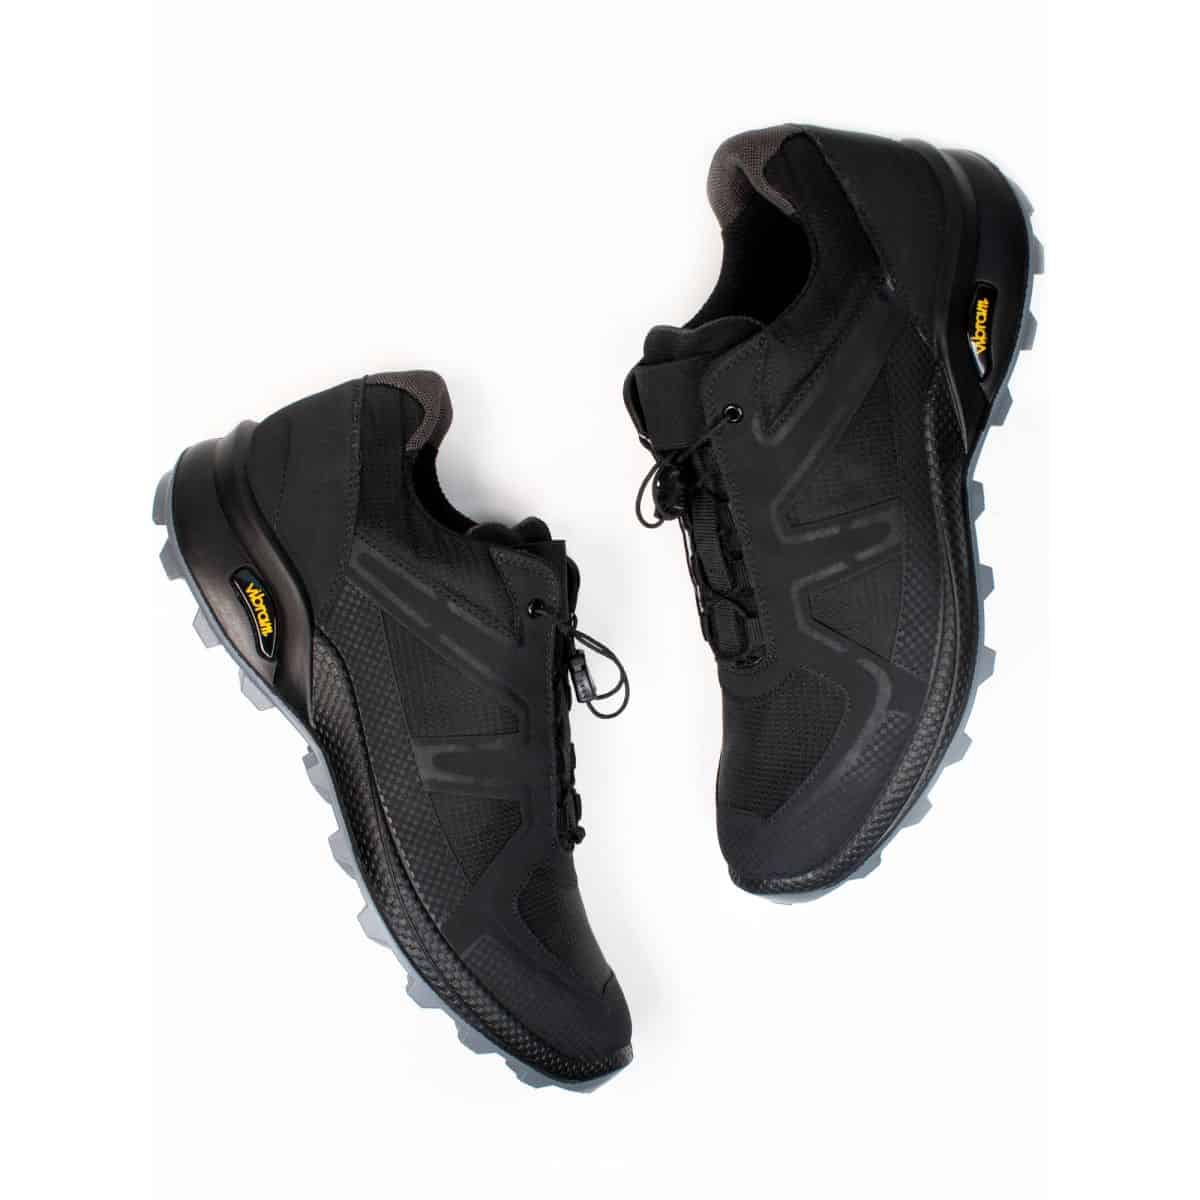 Black sport trainers from Wills